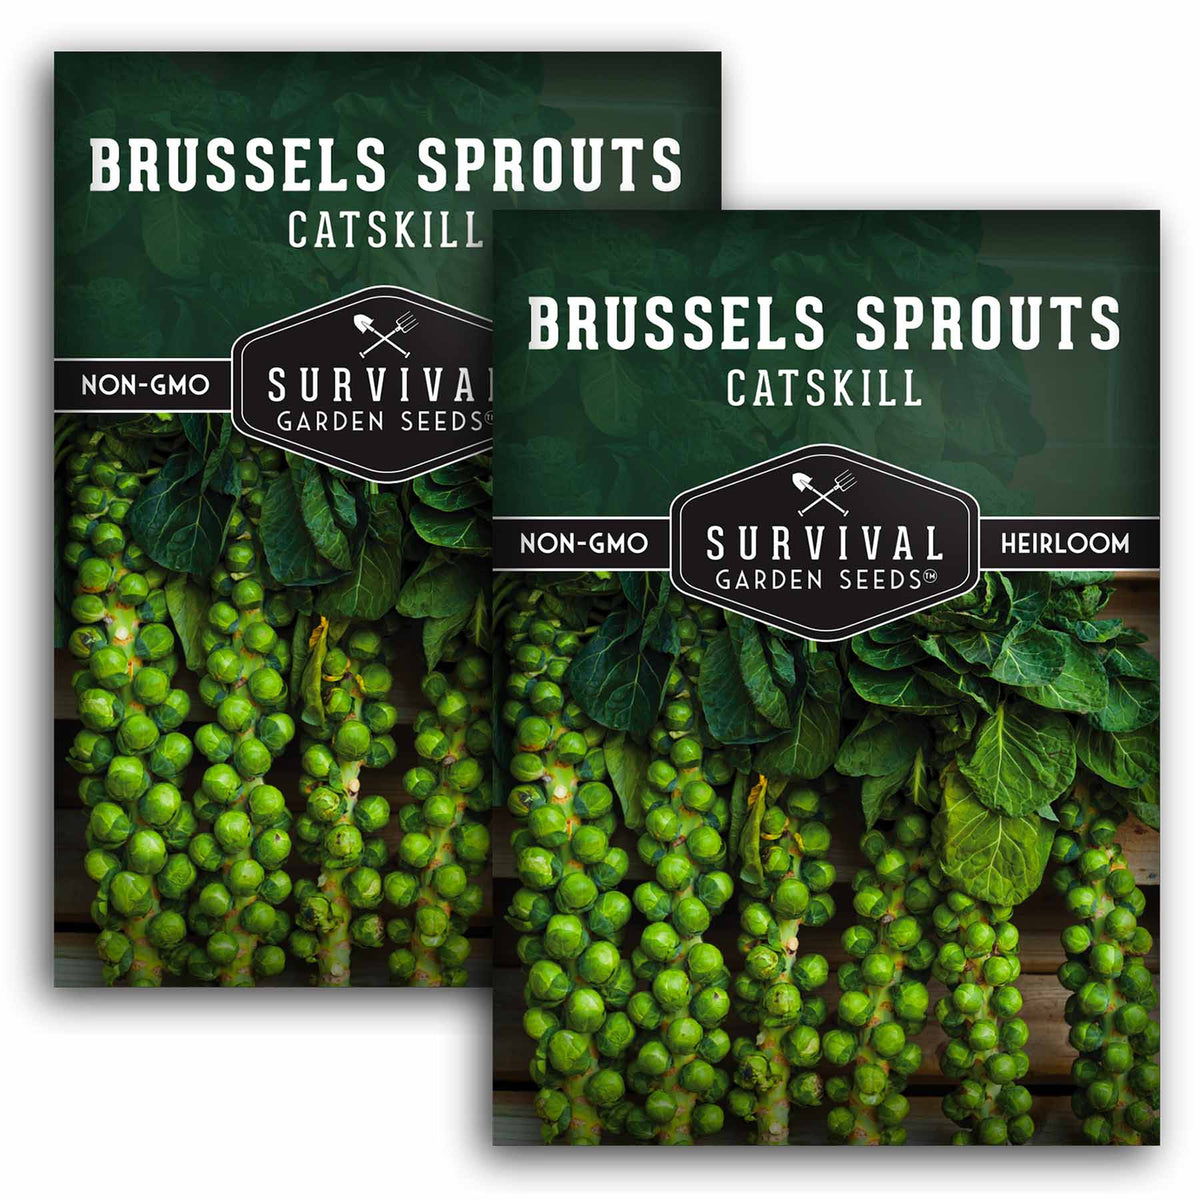 2 packs of Catskill Brussels Sprouts seeds